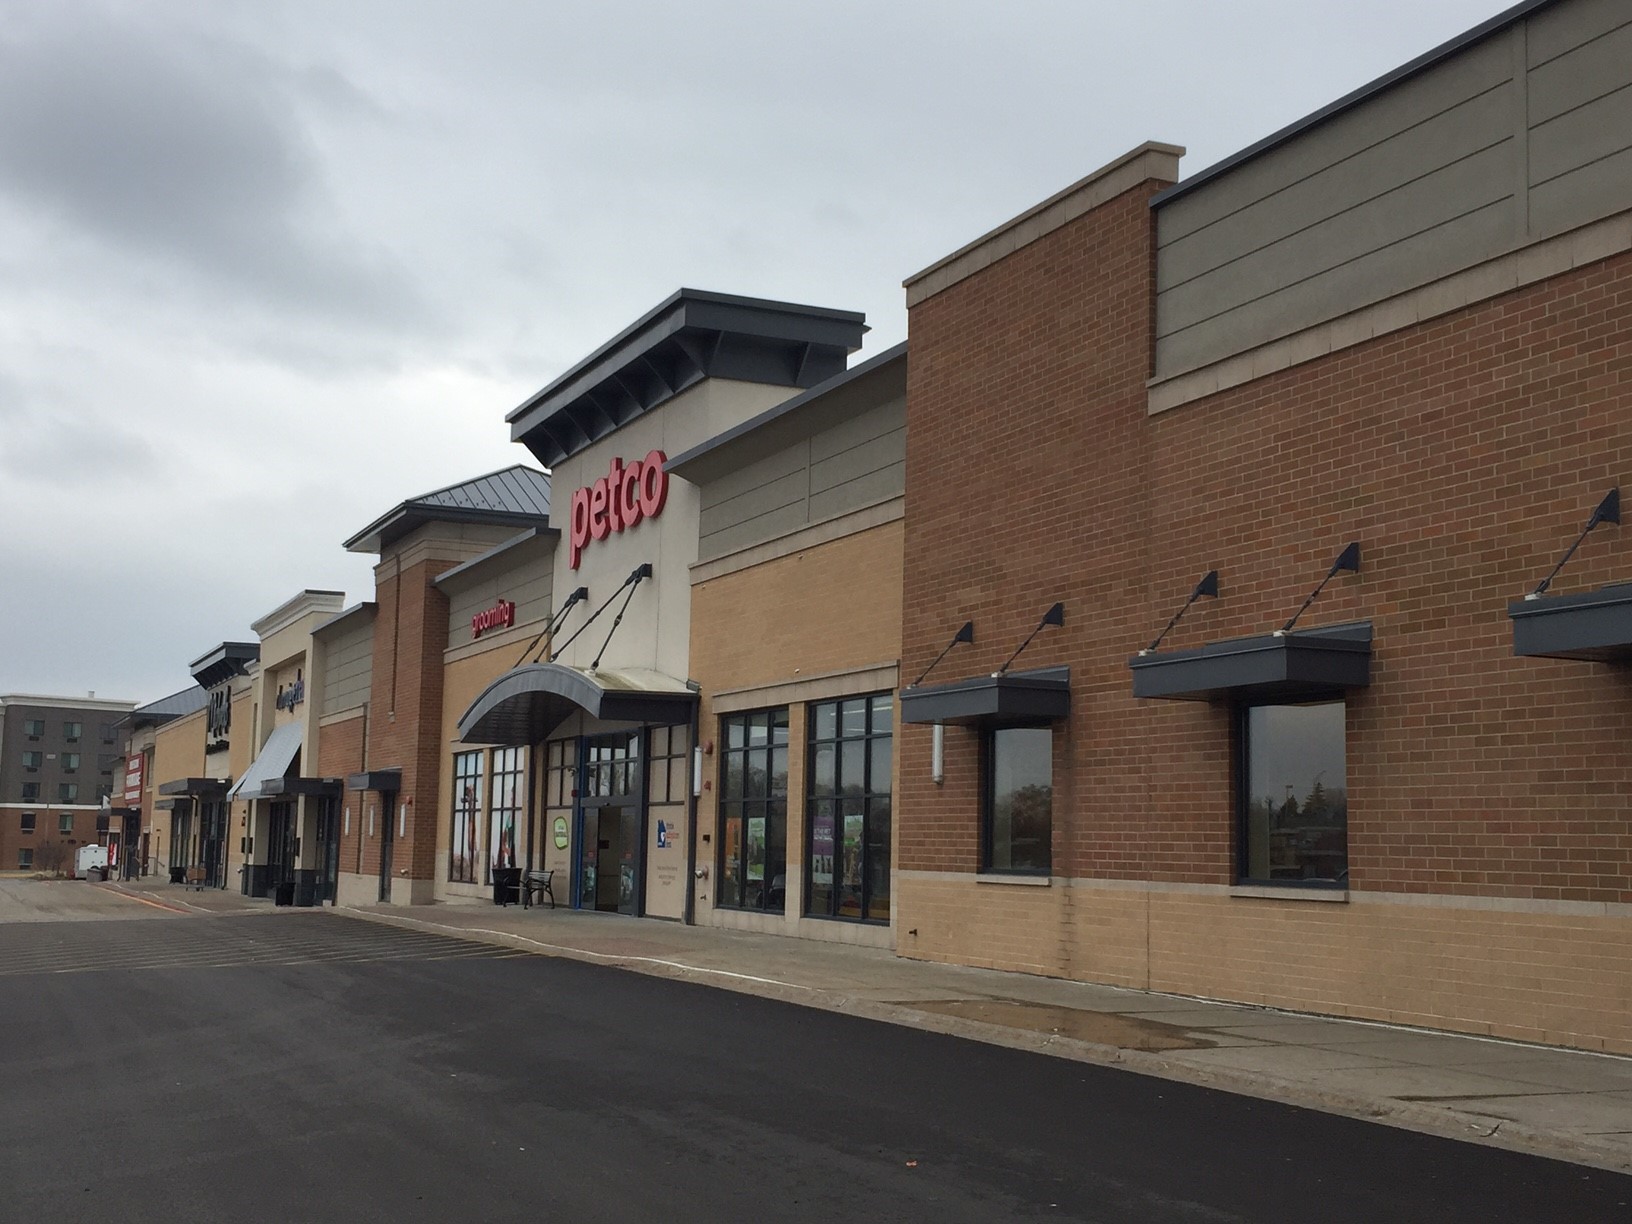 Retail suburban shopping center with 4 freestanding out lot buildings.